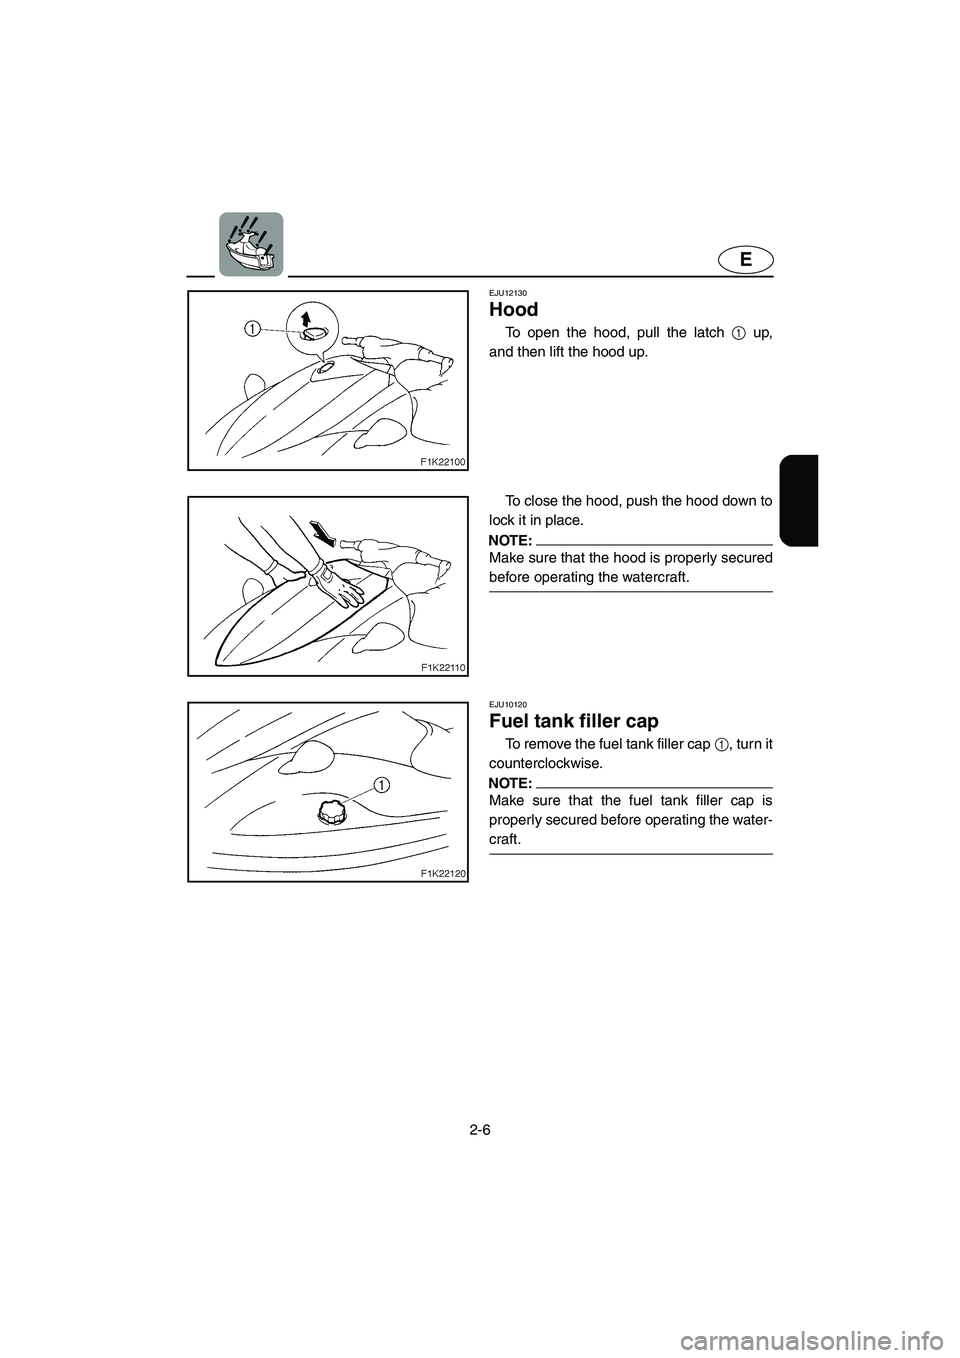 YAMAHA VX SPORT 2005  Owners Manual 2-6
E
EJU12130 
Hood  
To open the hood, pull the latch 1 up,
and then lift the hood up. 
To close the hood, push the hood down to
lock it in place. 
NOTE:@ Make sure that the hood is properly secured